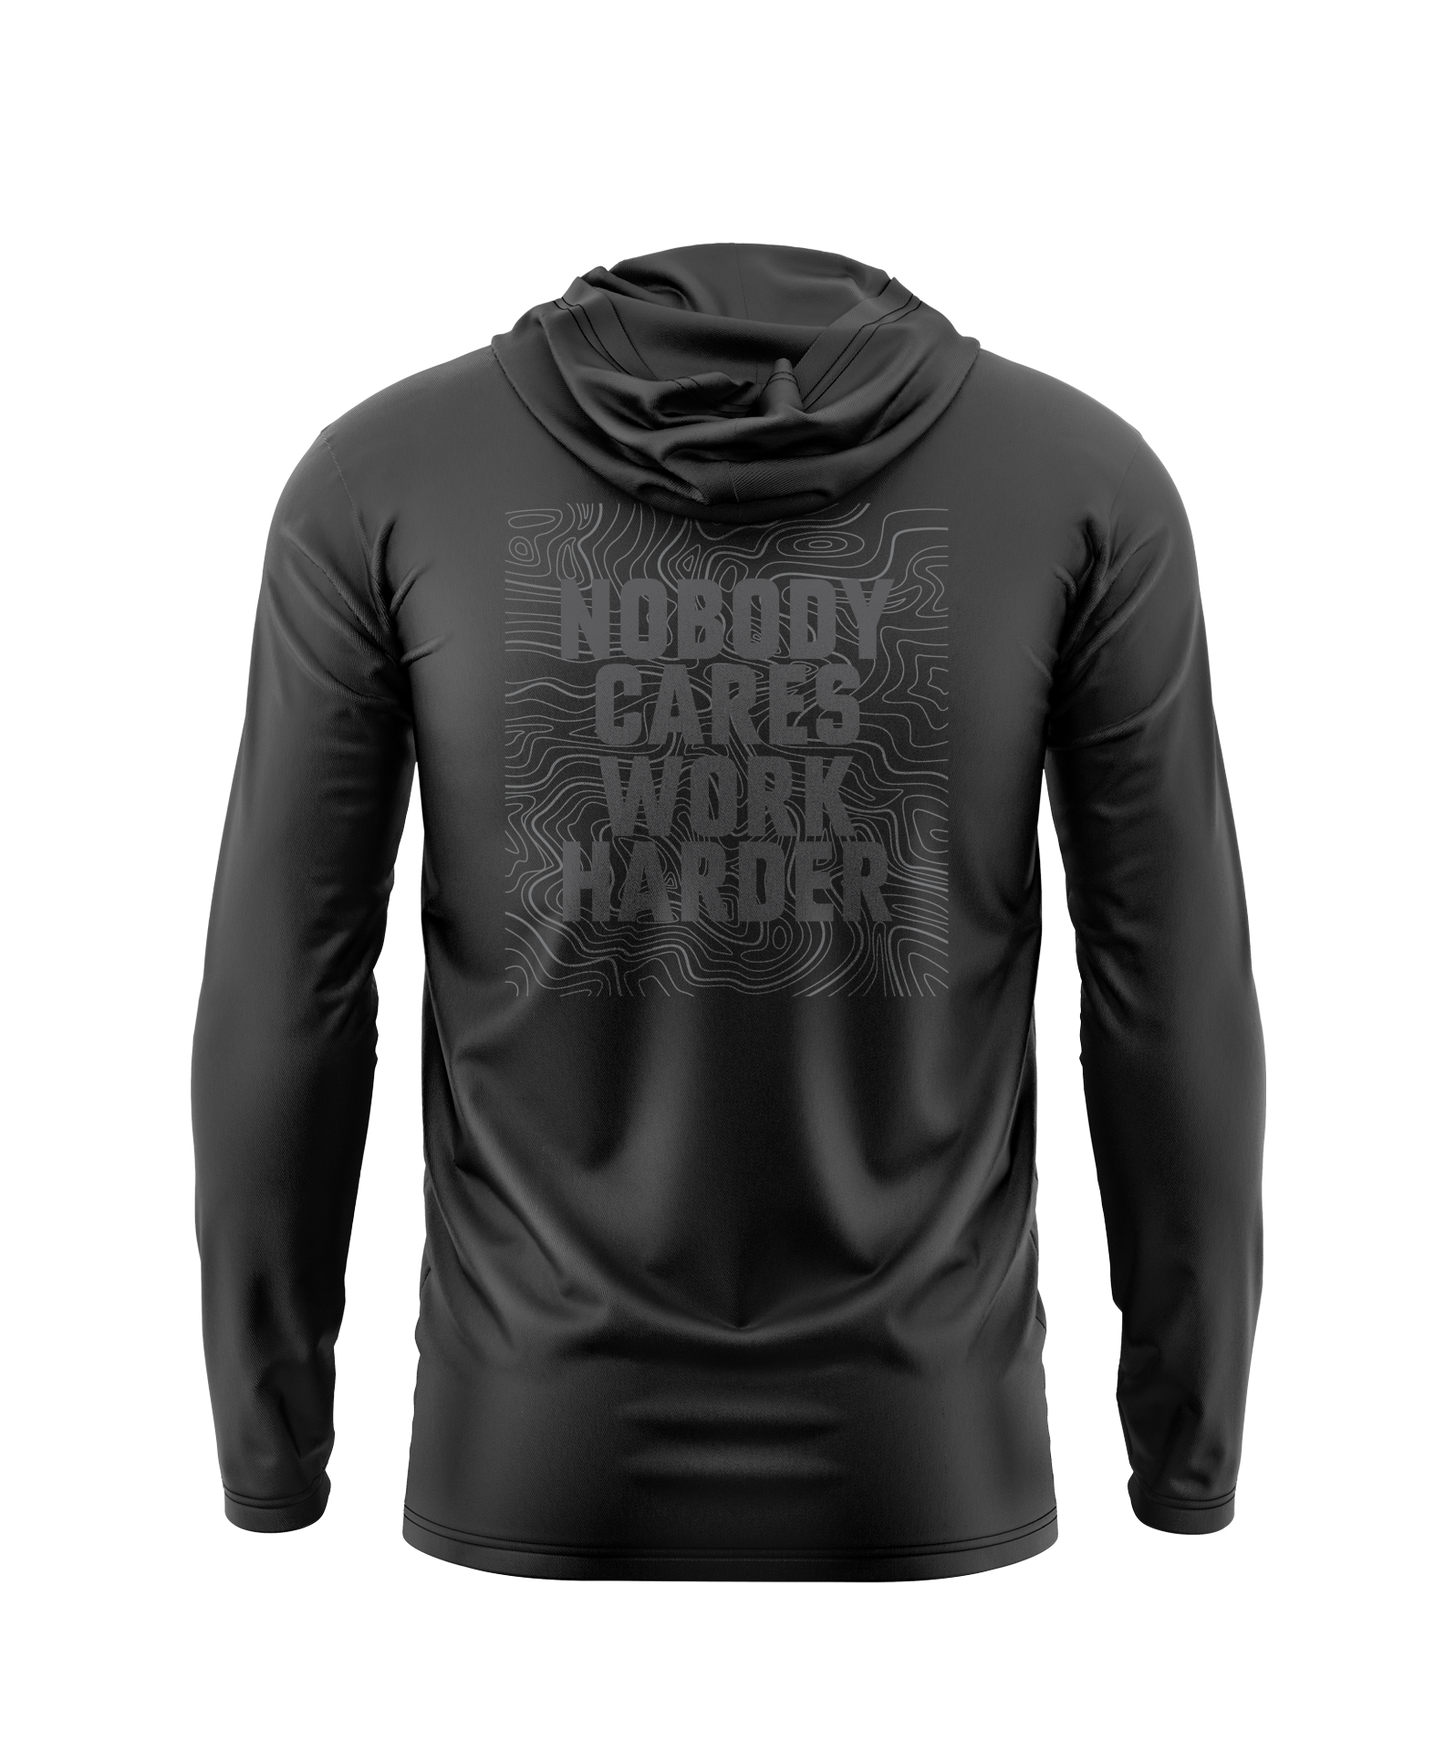 Nobody Cares Topography "Black Collection" Athletic Hoodie